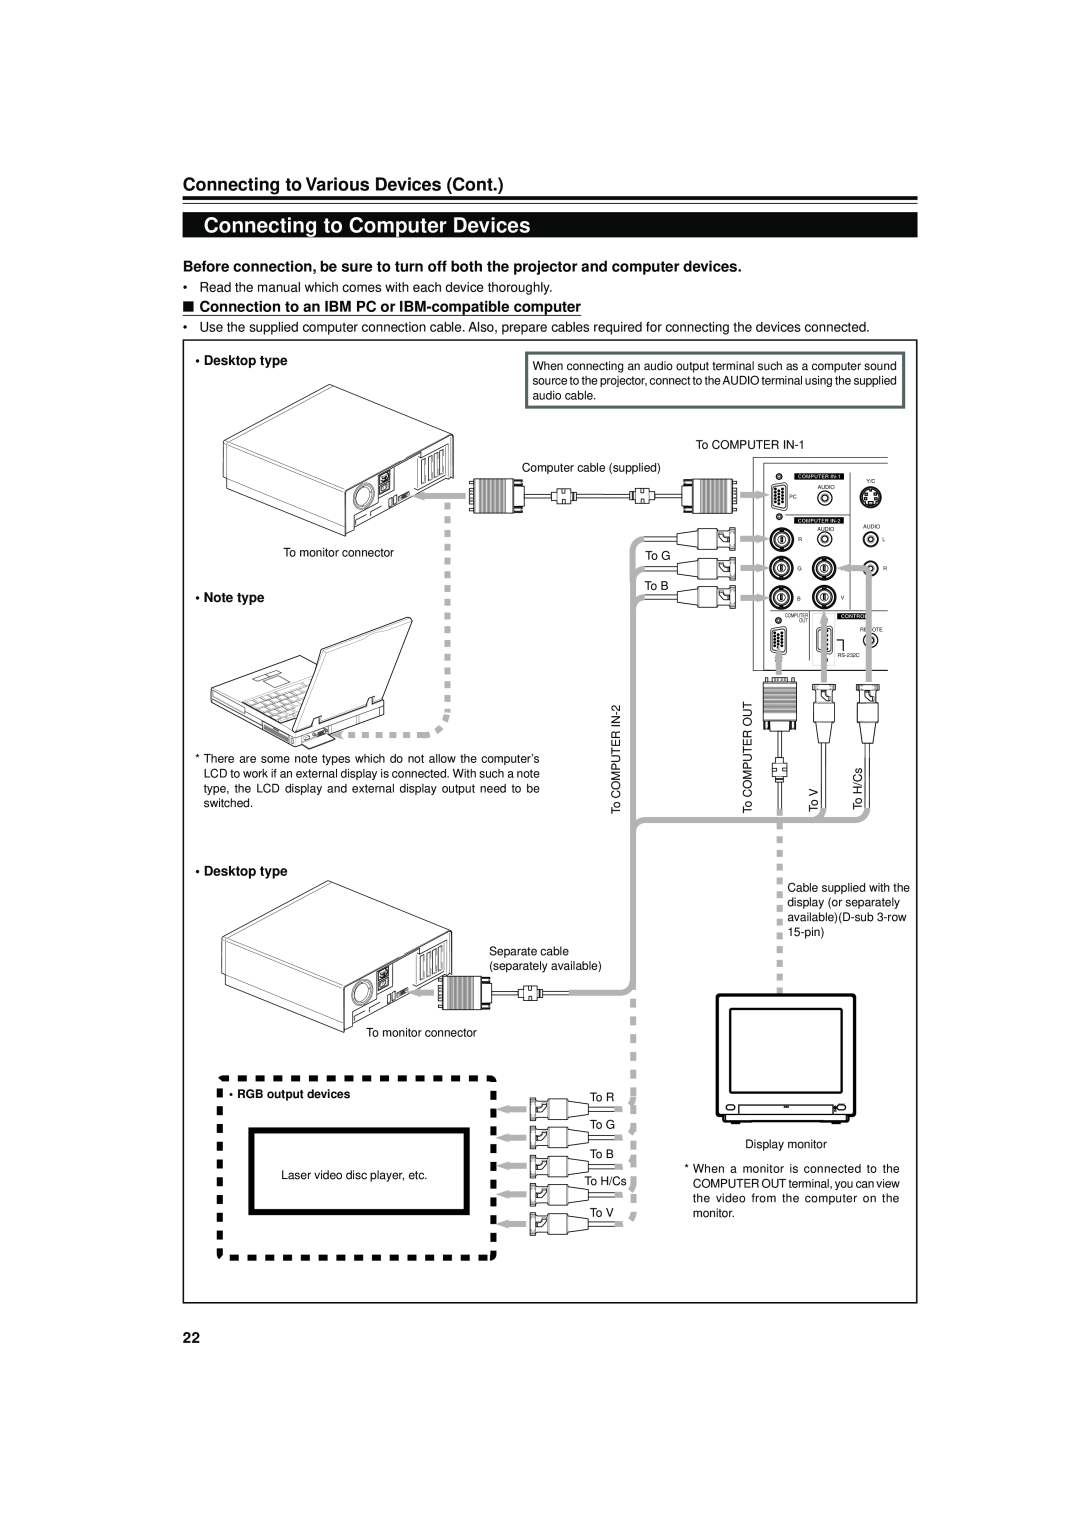 JVC DLA-S15U manual Connecting to Computer Devices, Connecting to Various Devices Cont, Desktop type, Note type 